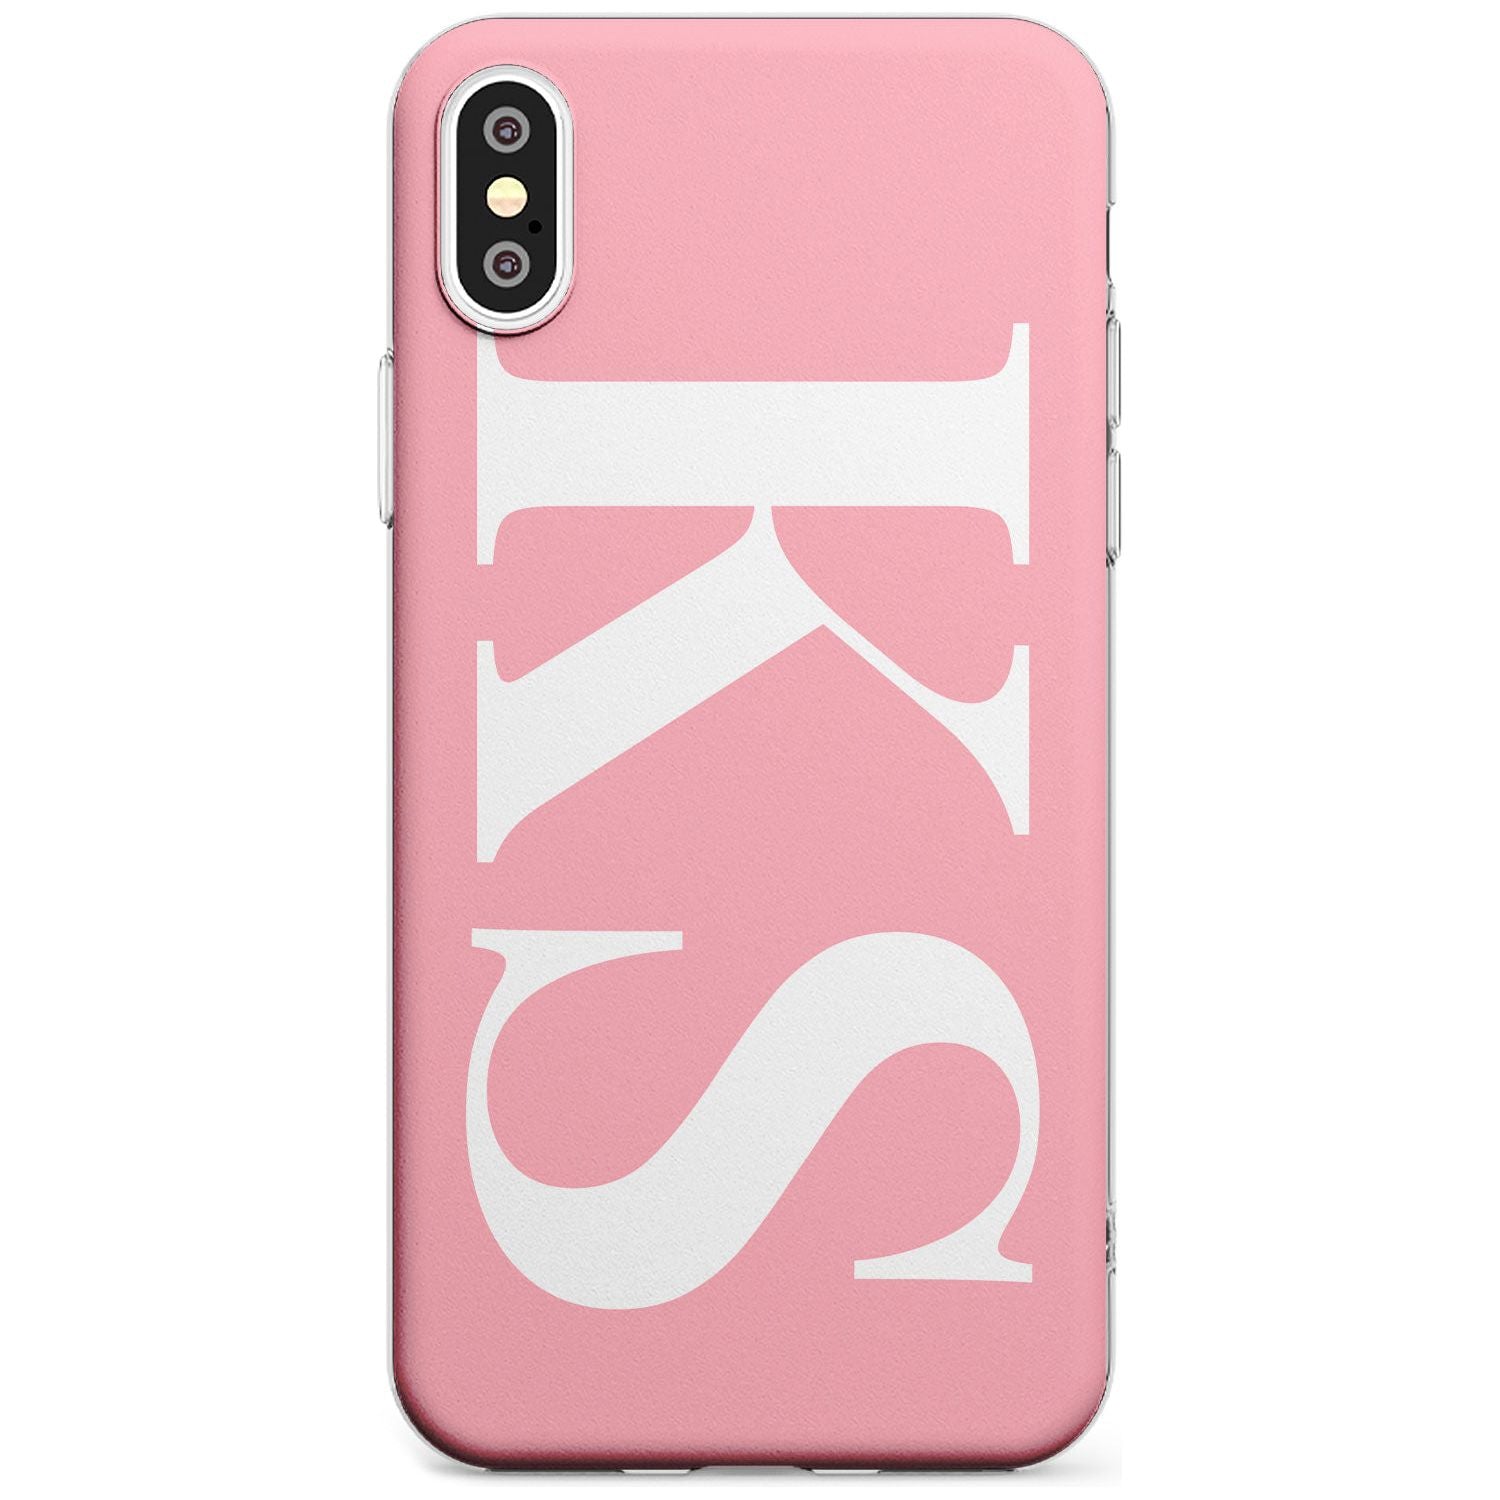 White & Pink Personalised Letters iPhone Case  Slim Case Custom Phone Case - Case Warehouse